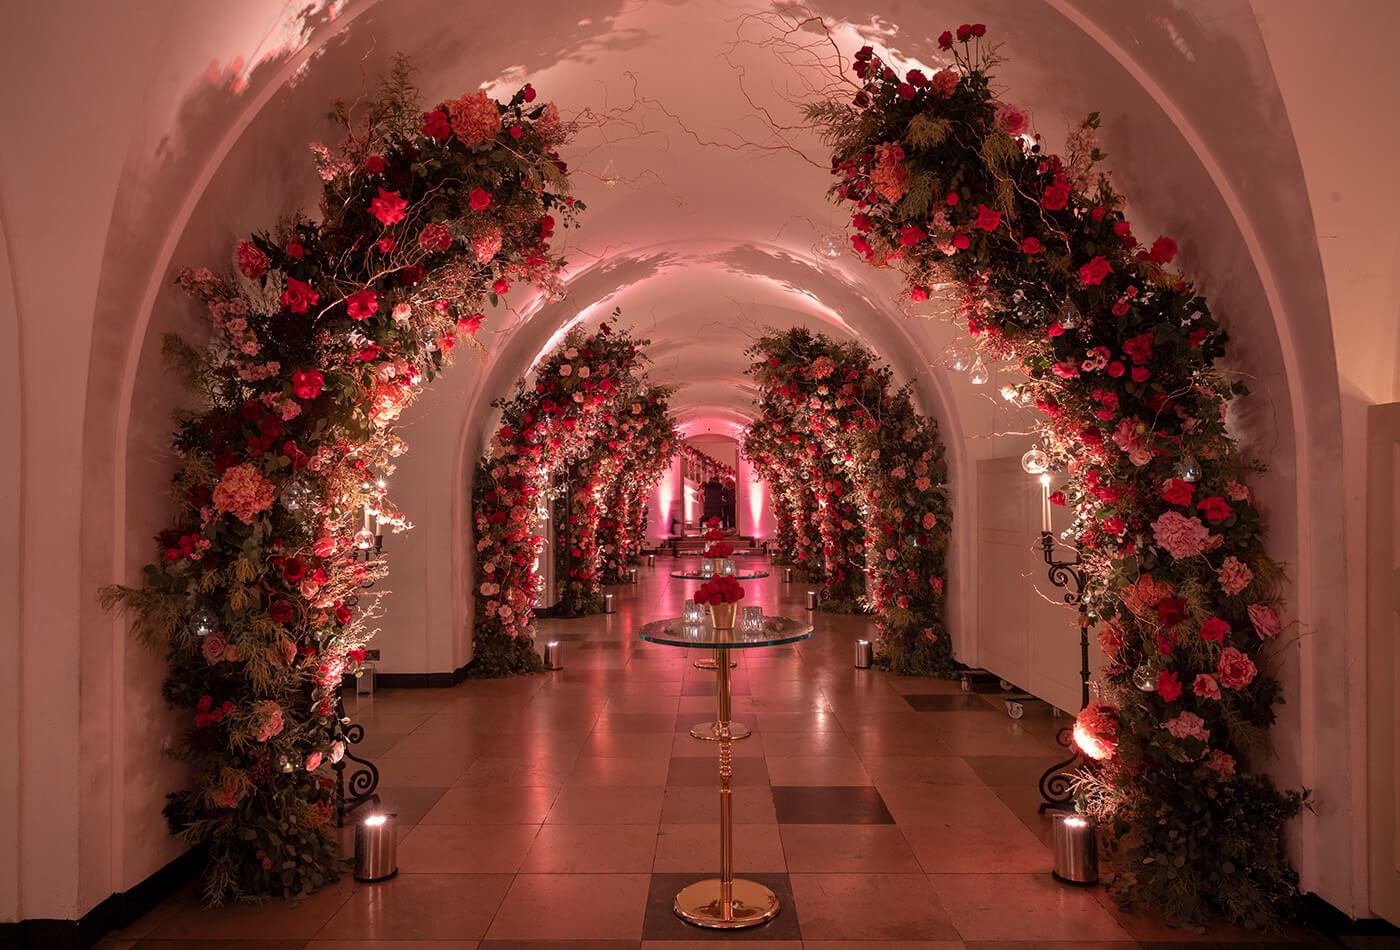 Red and pink floral arches